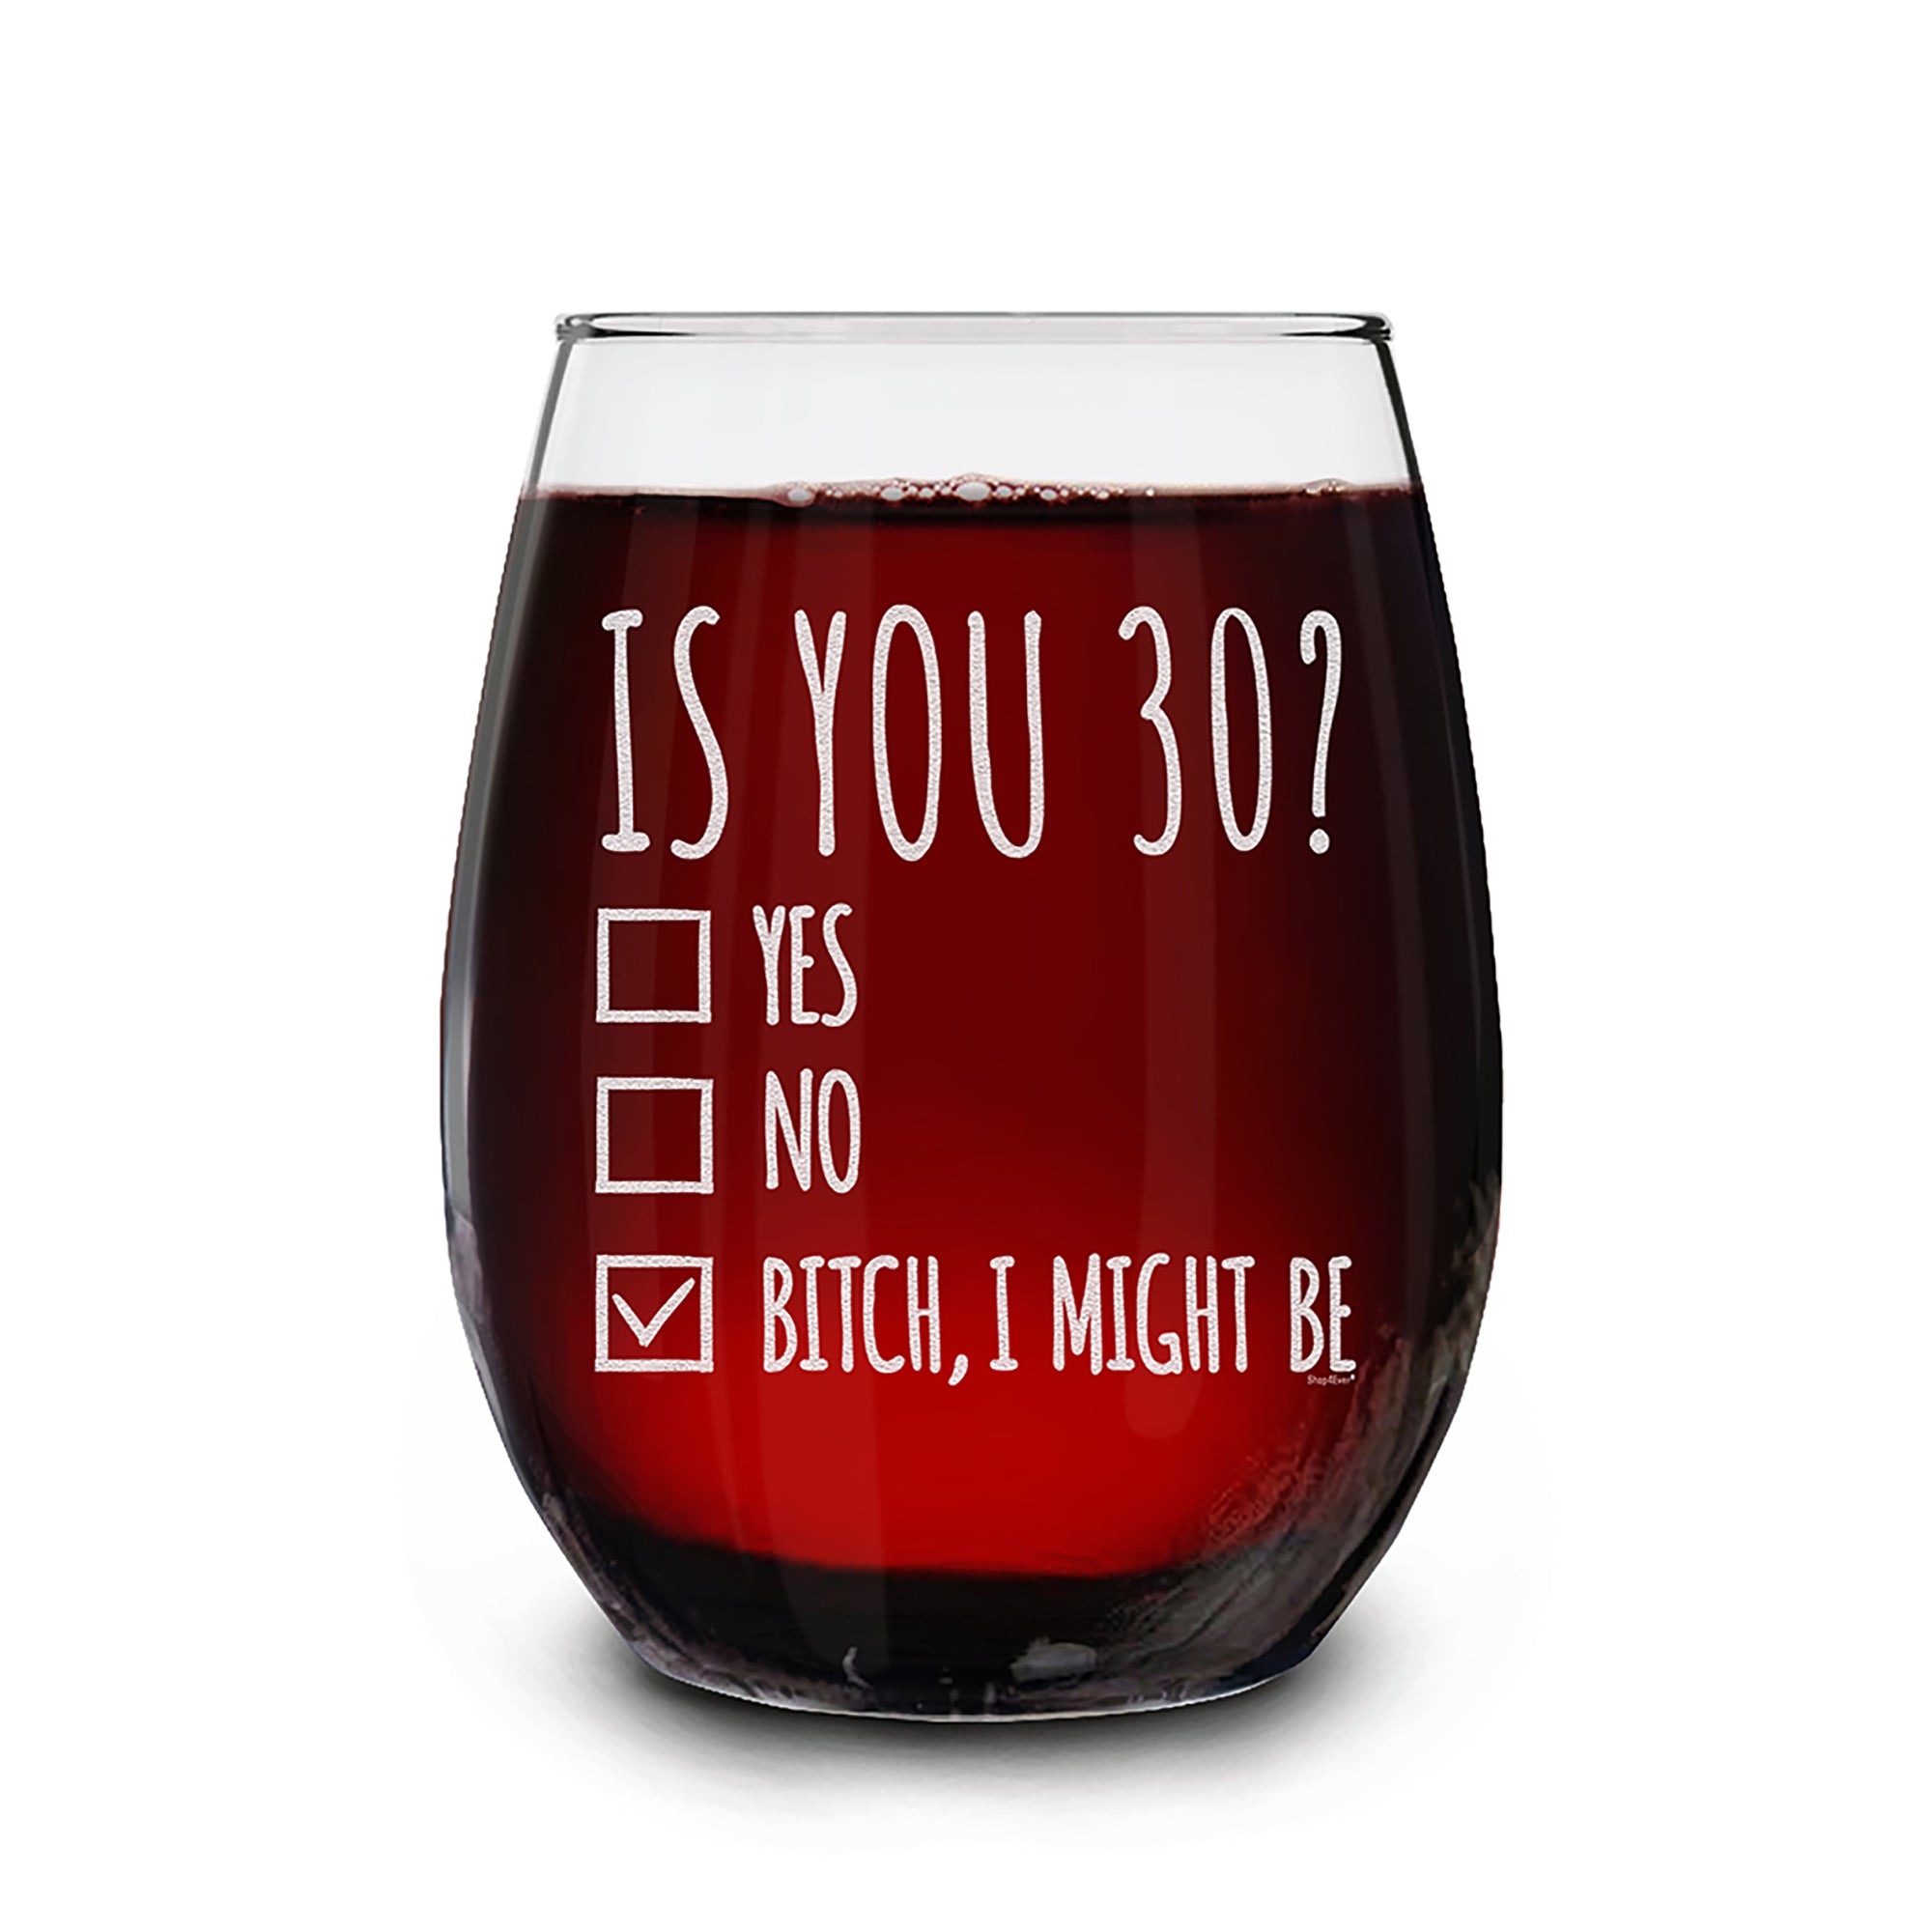 30th Birthday Wine Glass Gift for Women Is You 30? Yes No Engraved Stemless Wine Glass